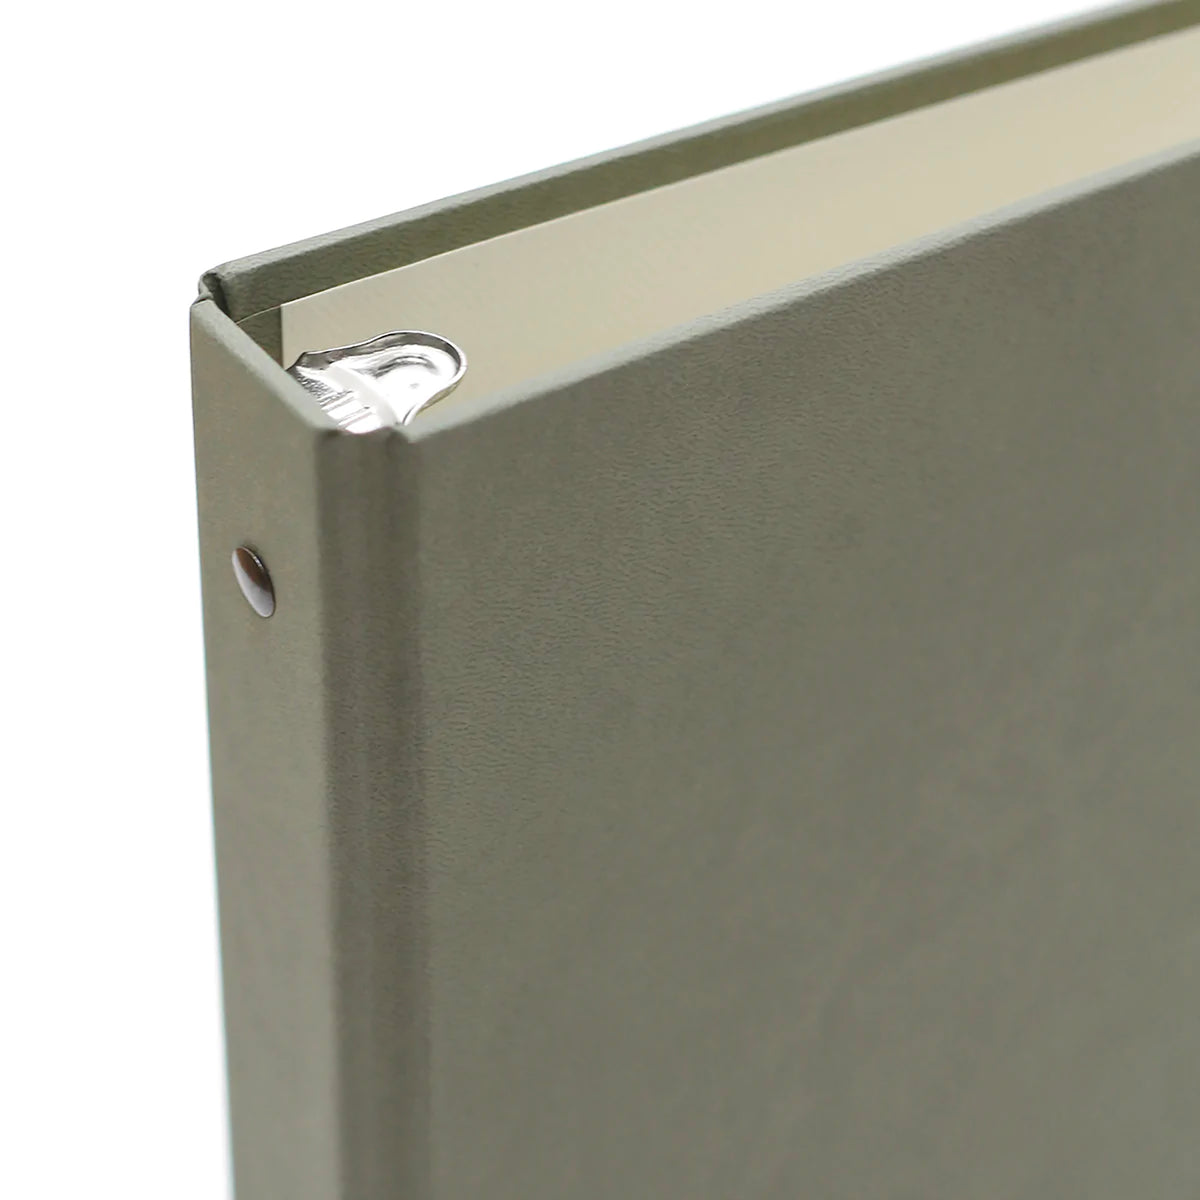 Large Photo Binder For 4x6 Photos | Cover: Moss Vegan Leather | Available Personalized